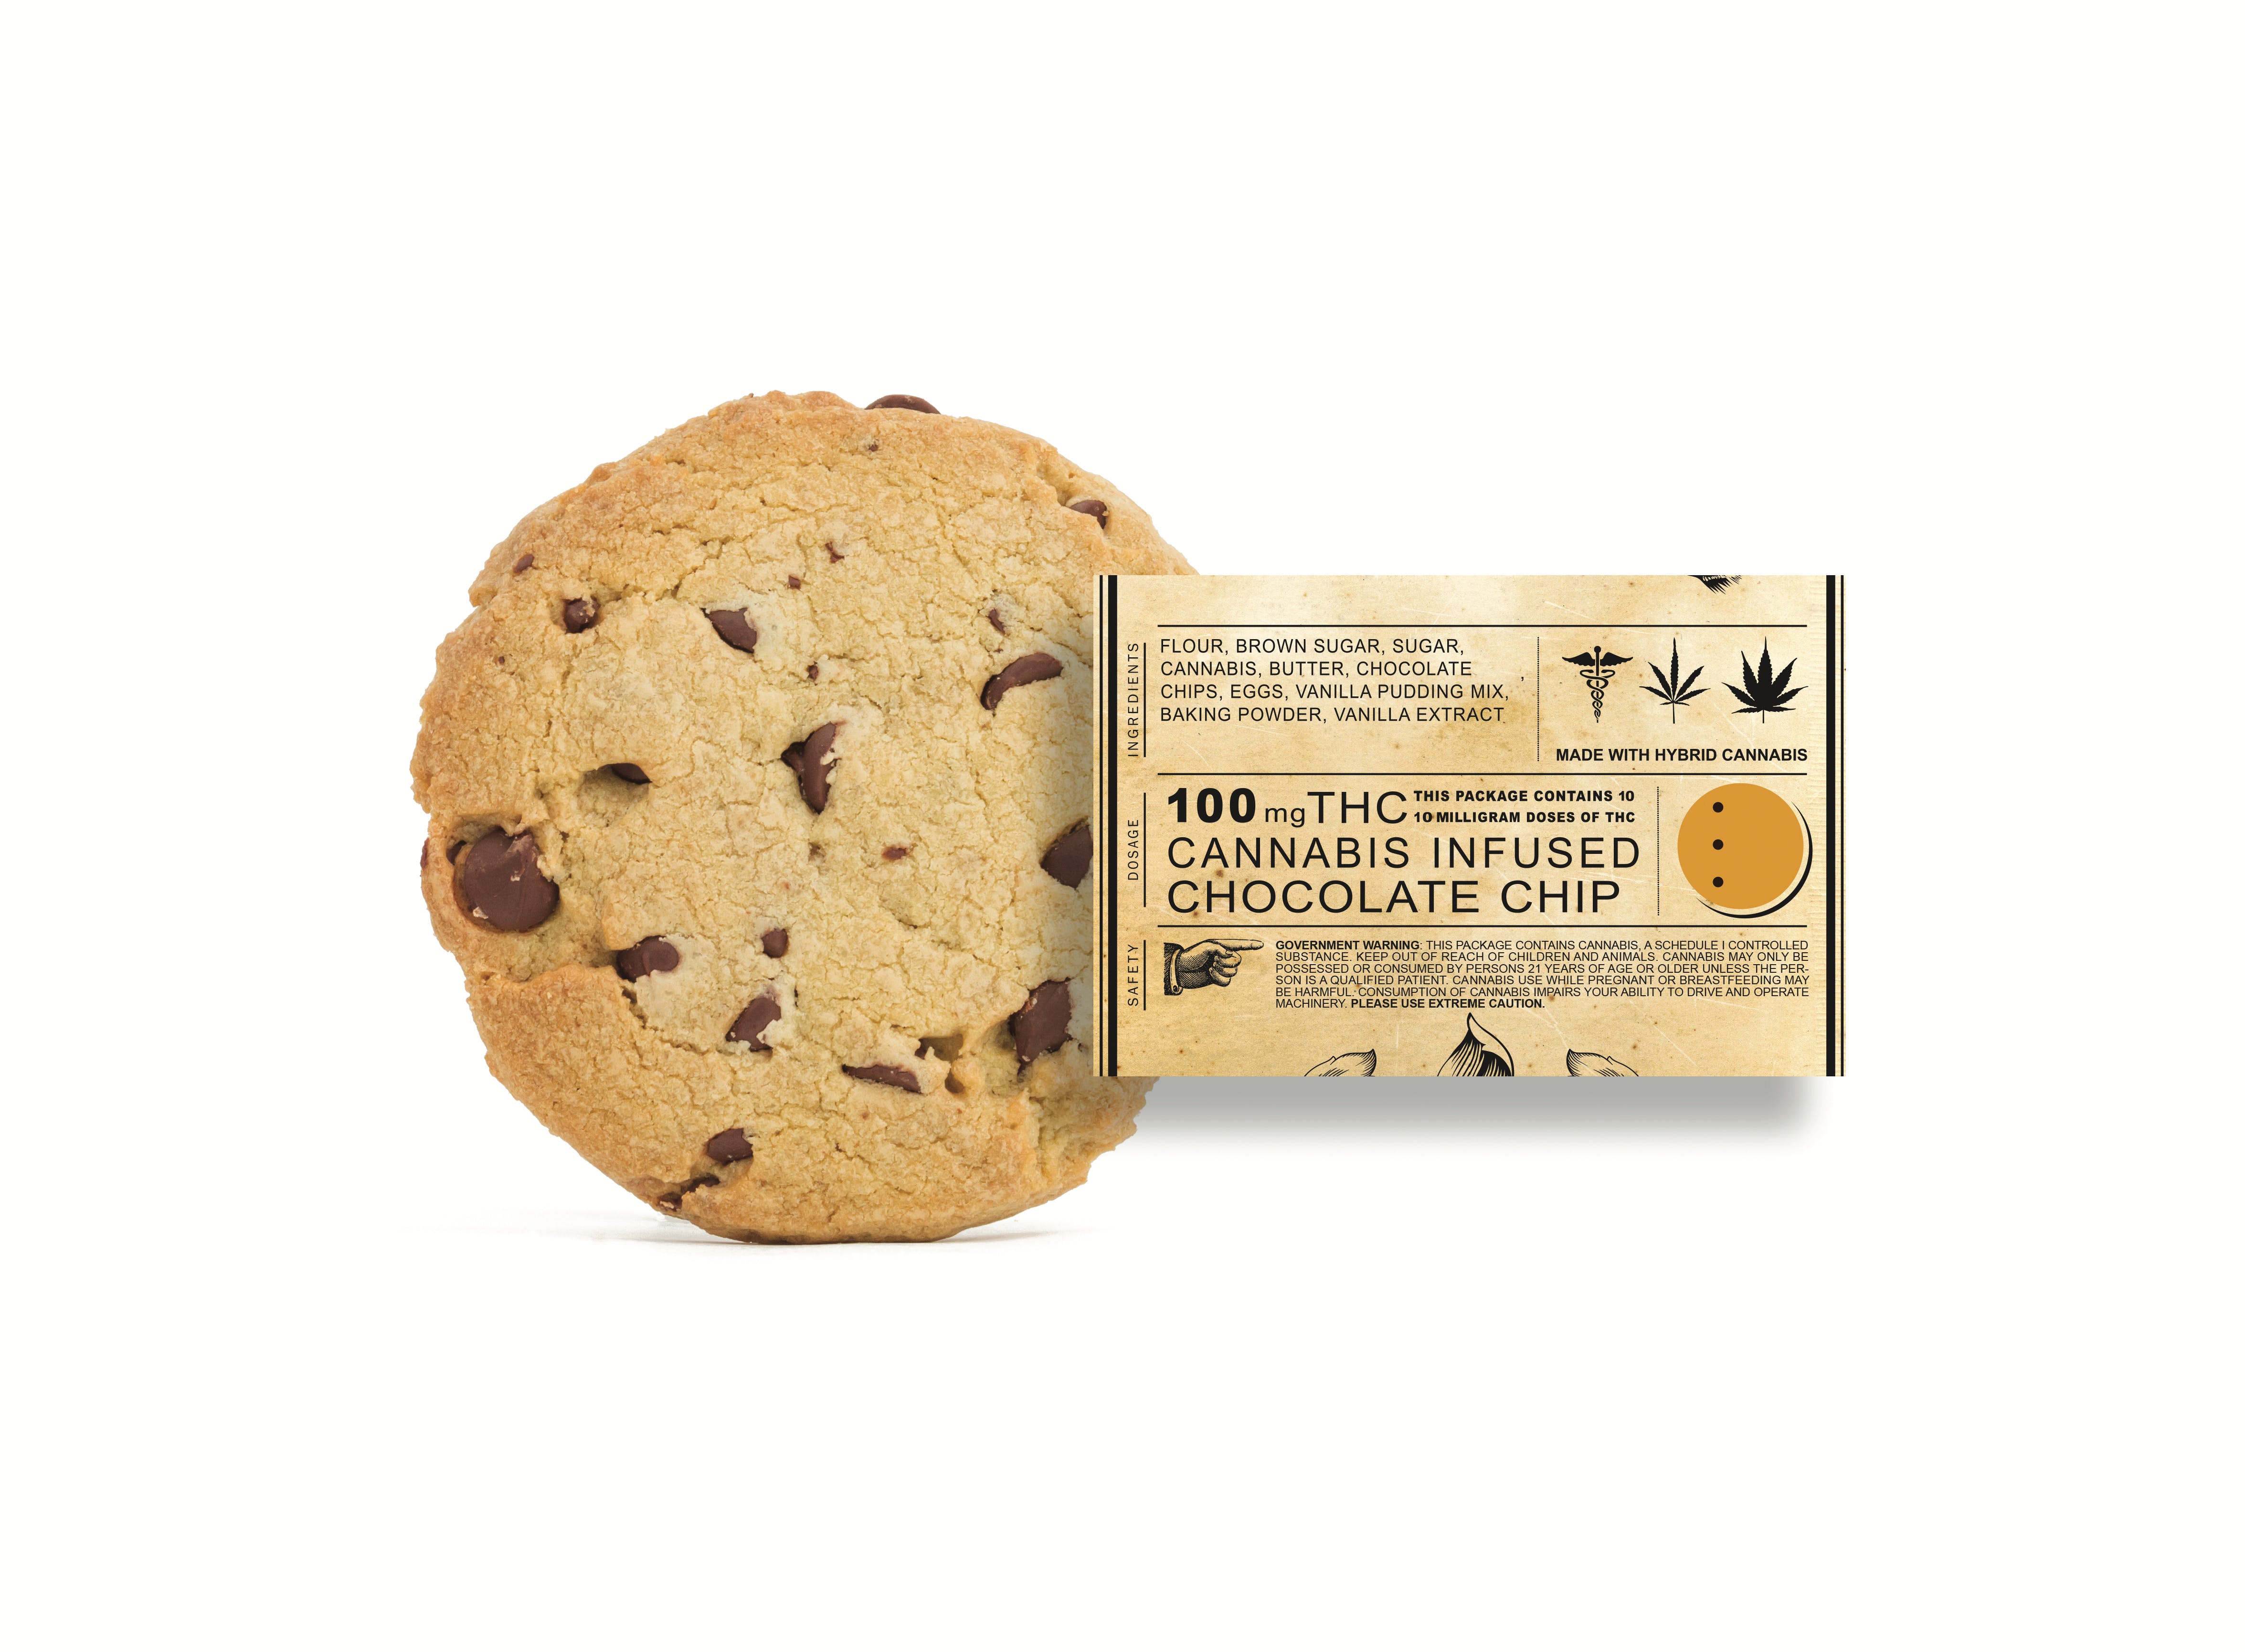 marijuana-dispensaries-fcc-florence-canna-clinic-in-los-angeles-chocolate-chip-cookie-2c-100mg